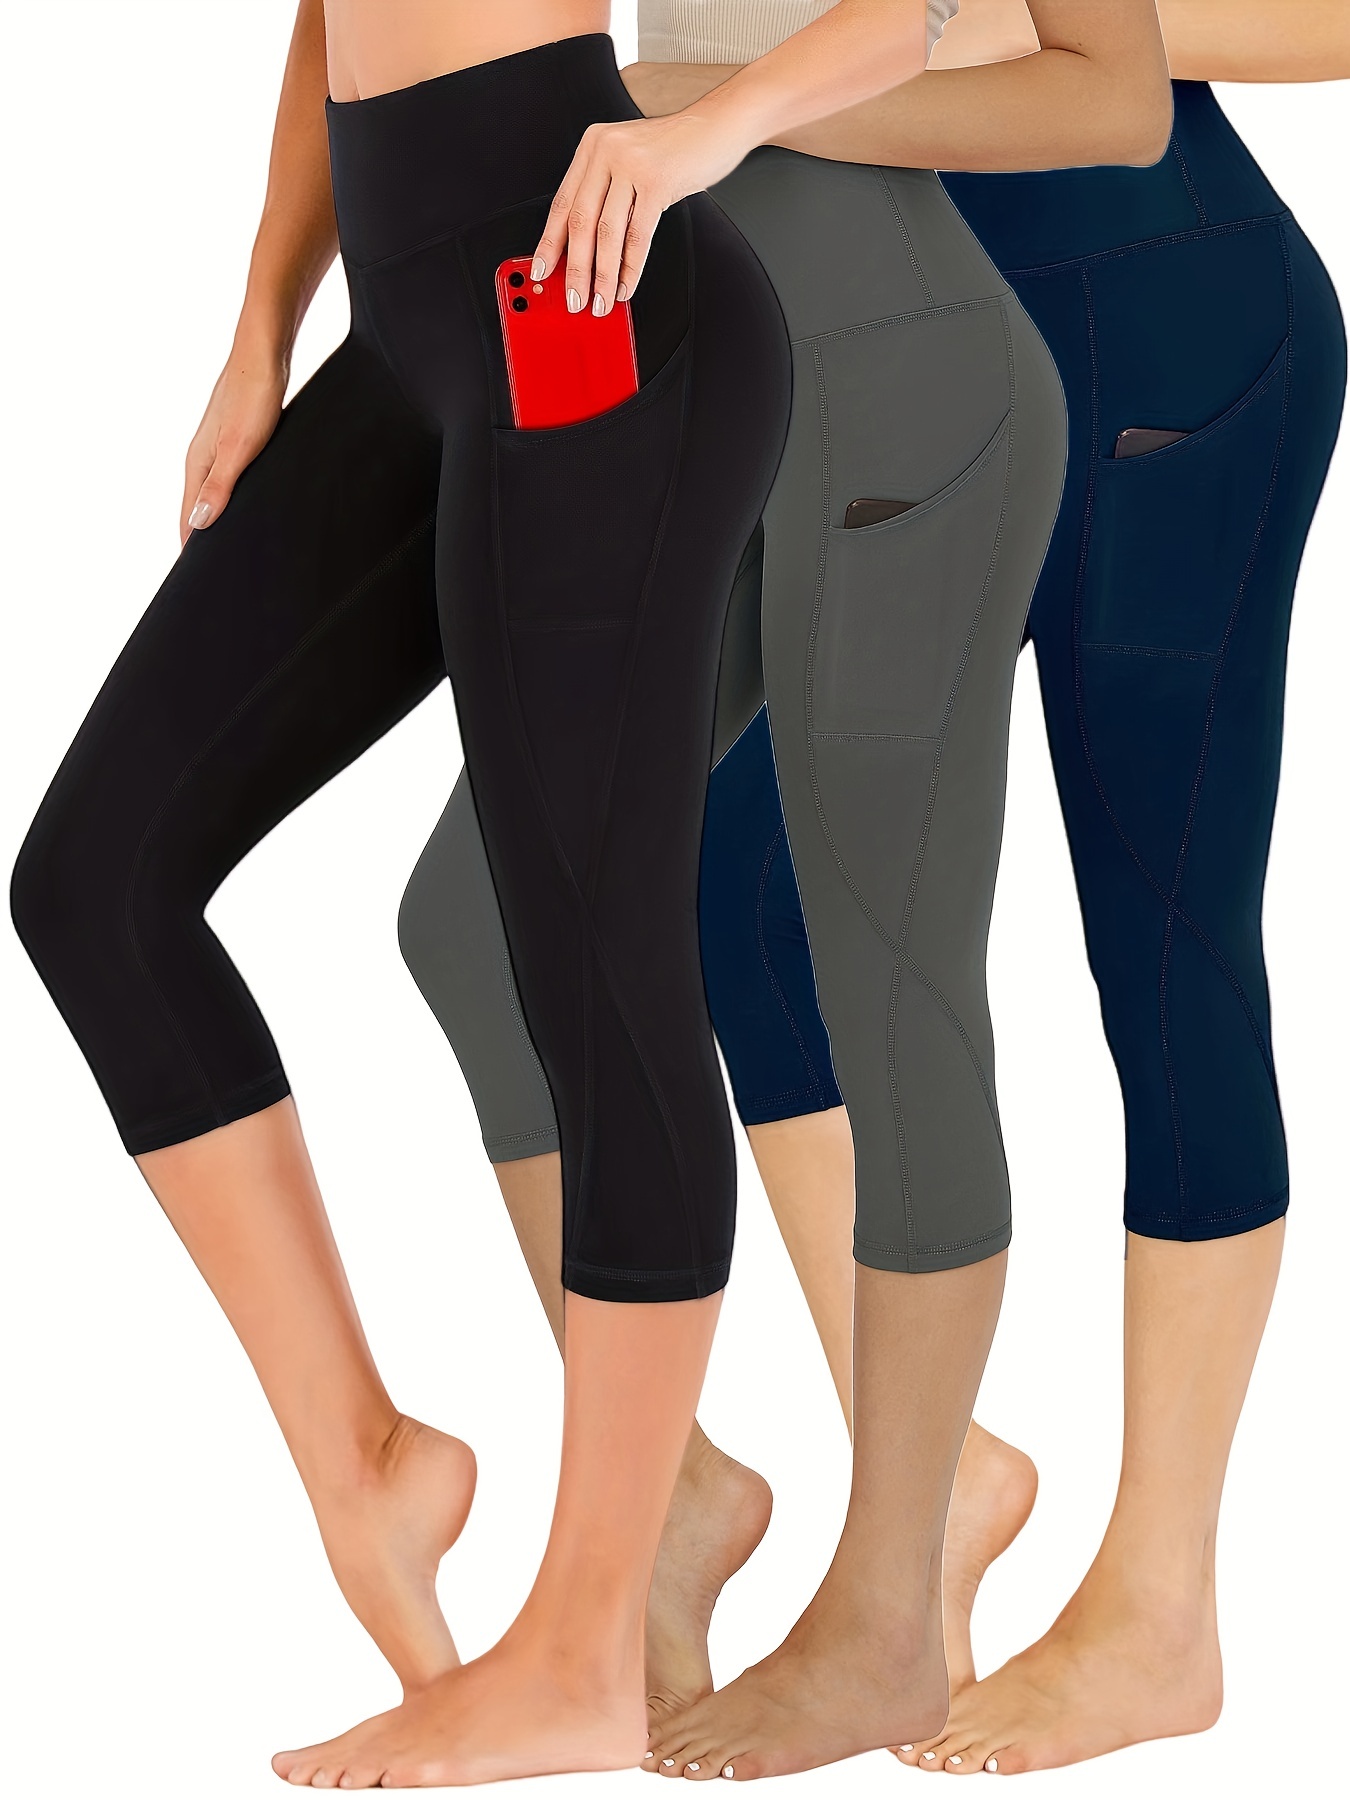 Capri Pants for Women Tummy Control Slim for with Pockets High